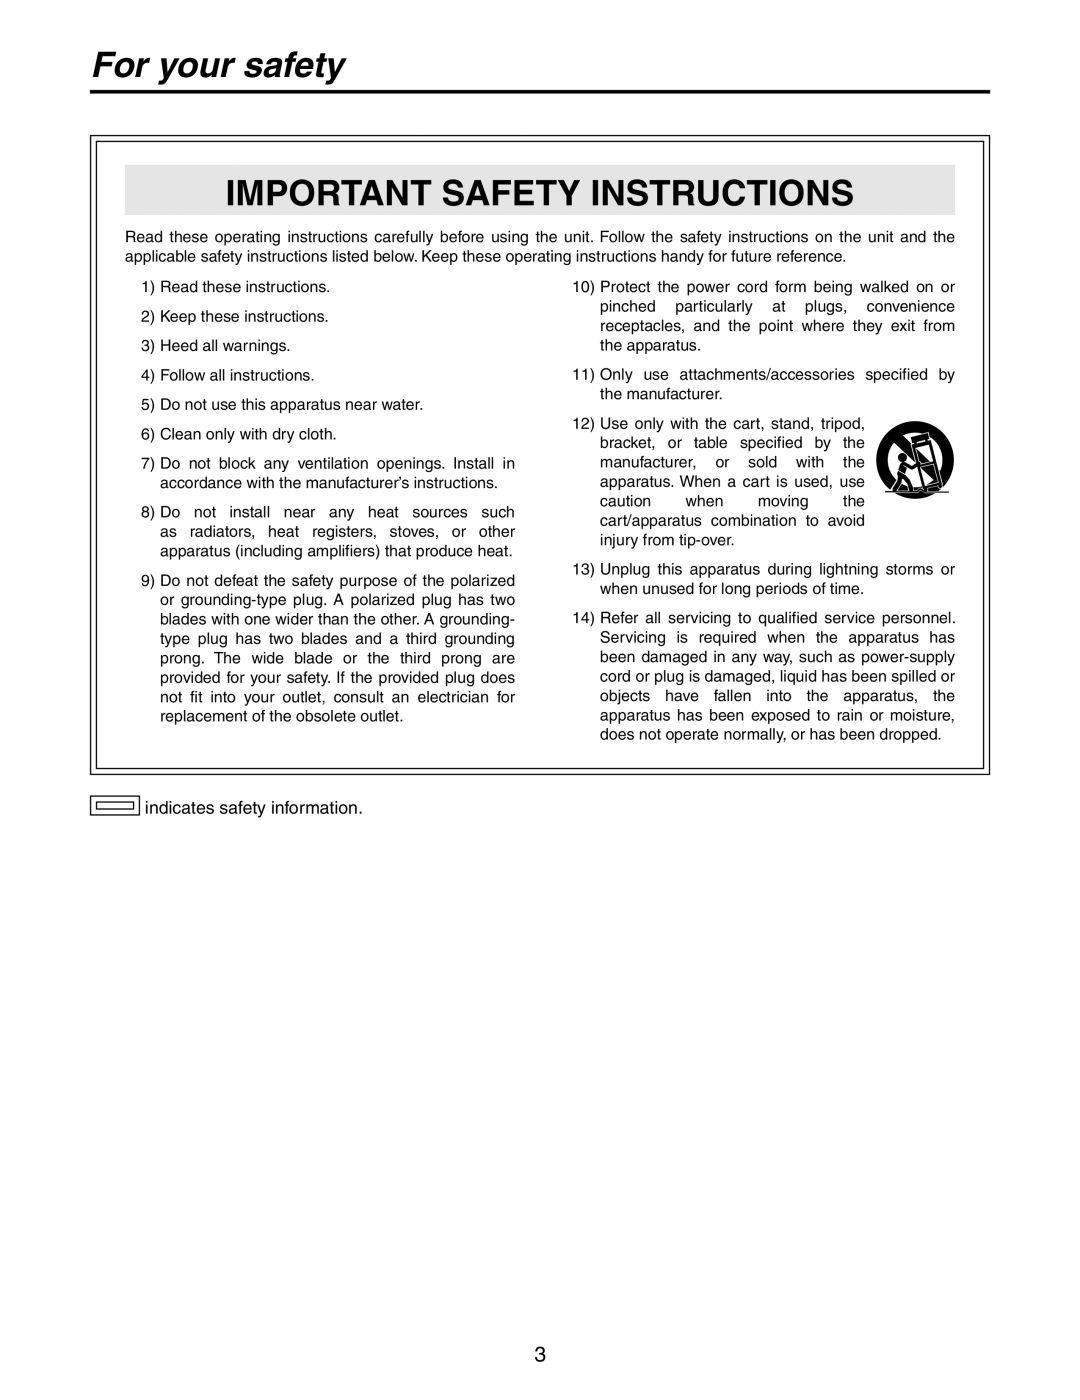 Panasonic AK-HC931BP manual For your safety, Important Safety Instructions, indicates safety information 